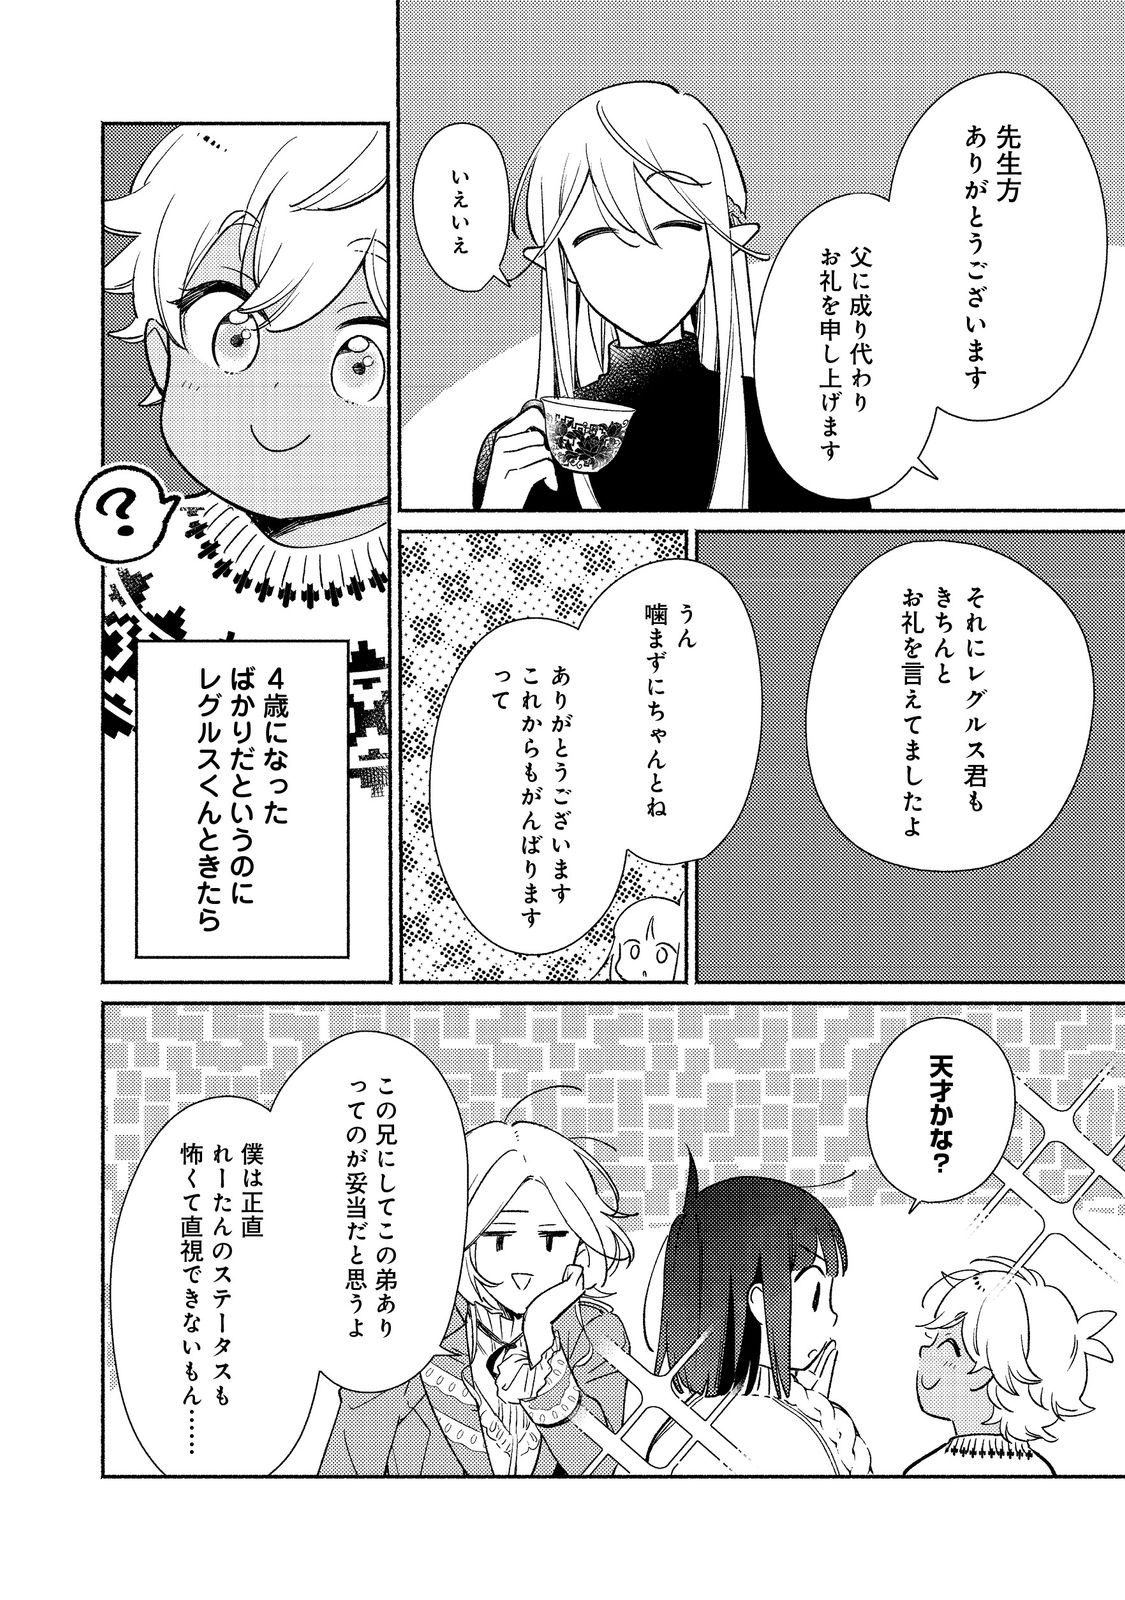 I’m the White Pig Nobleman 第27.1話 - Page 10